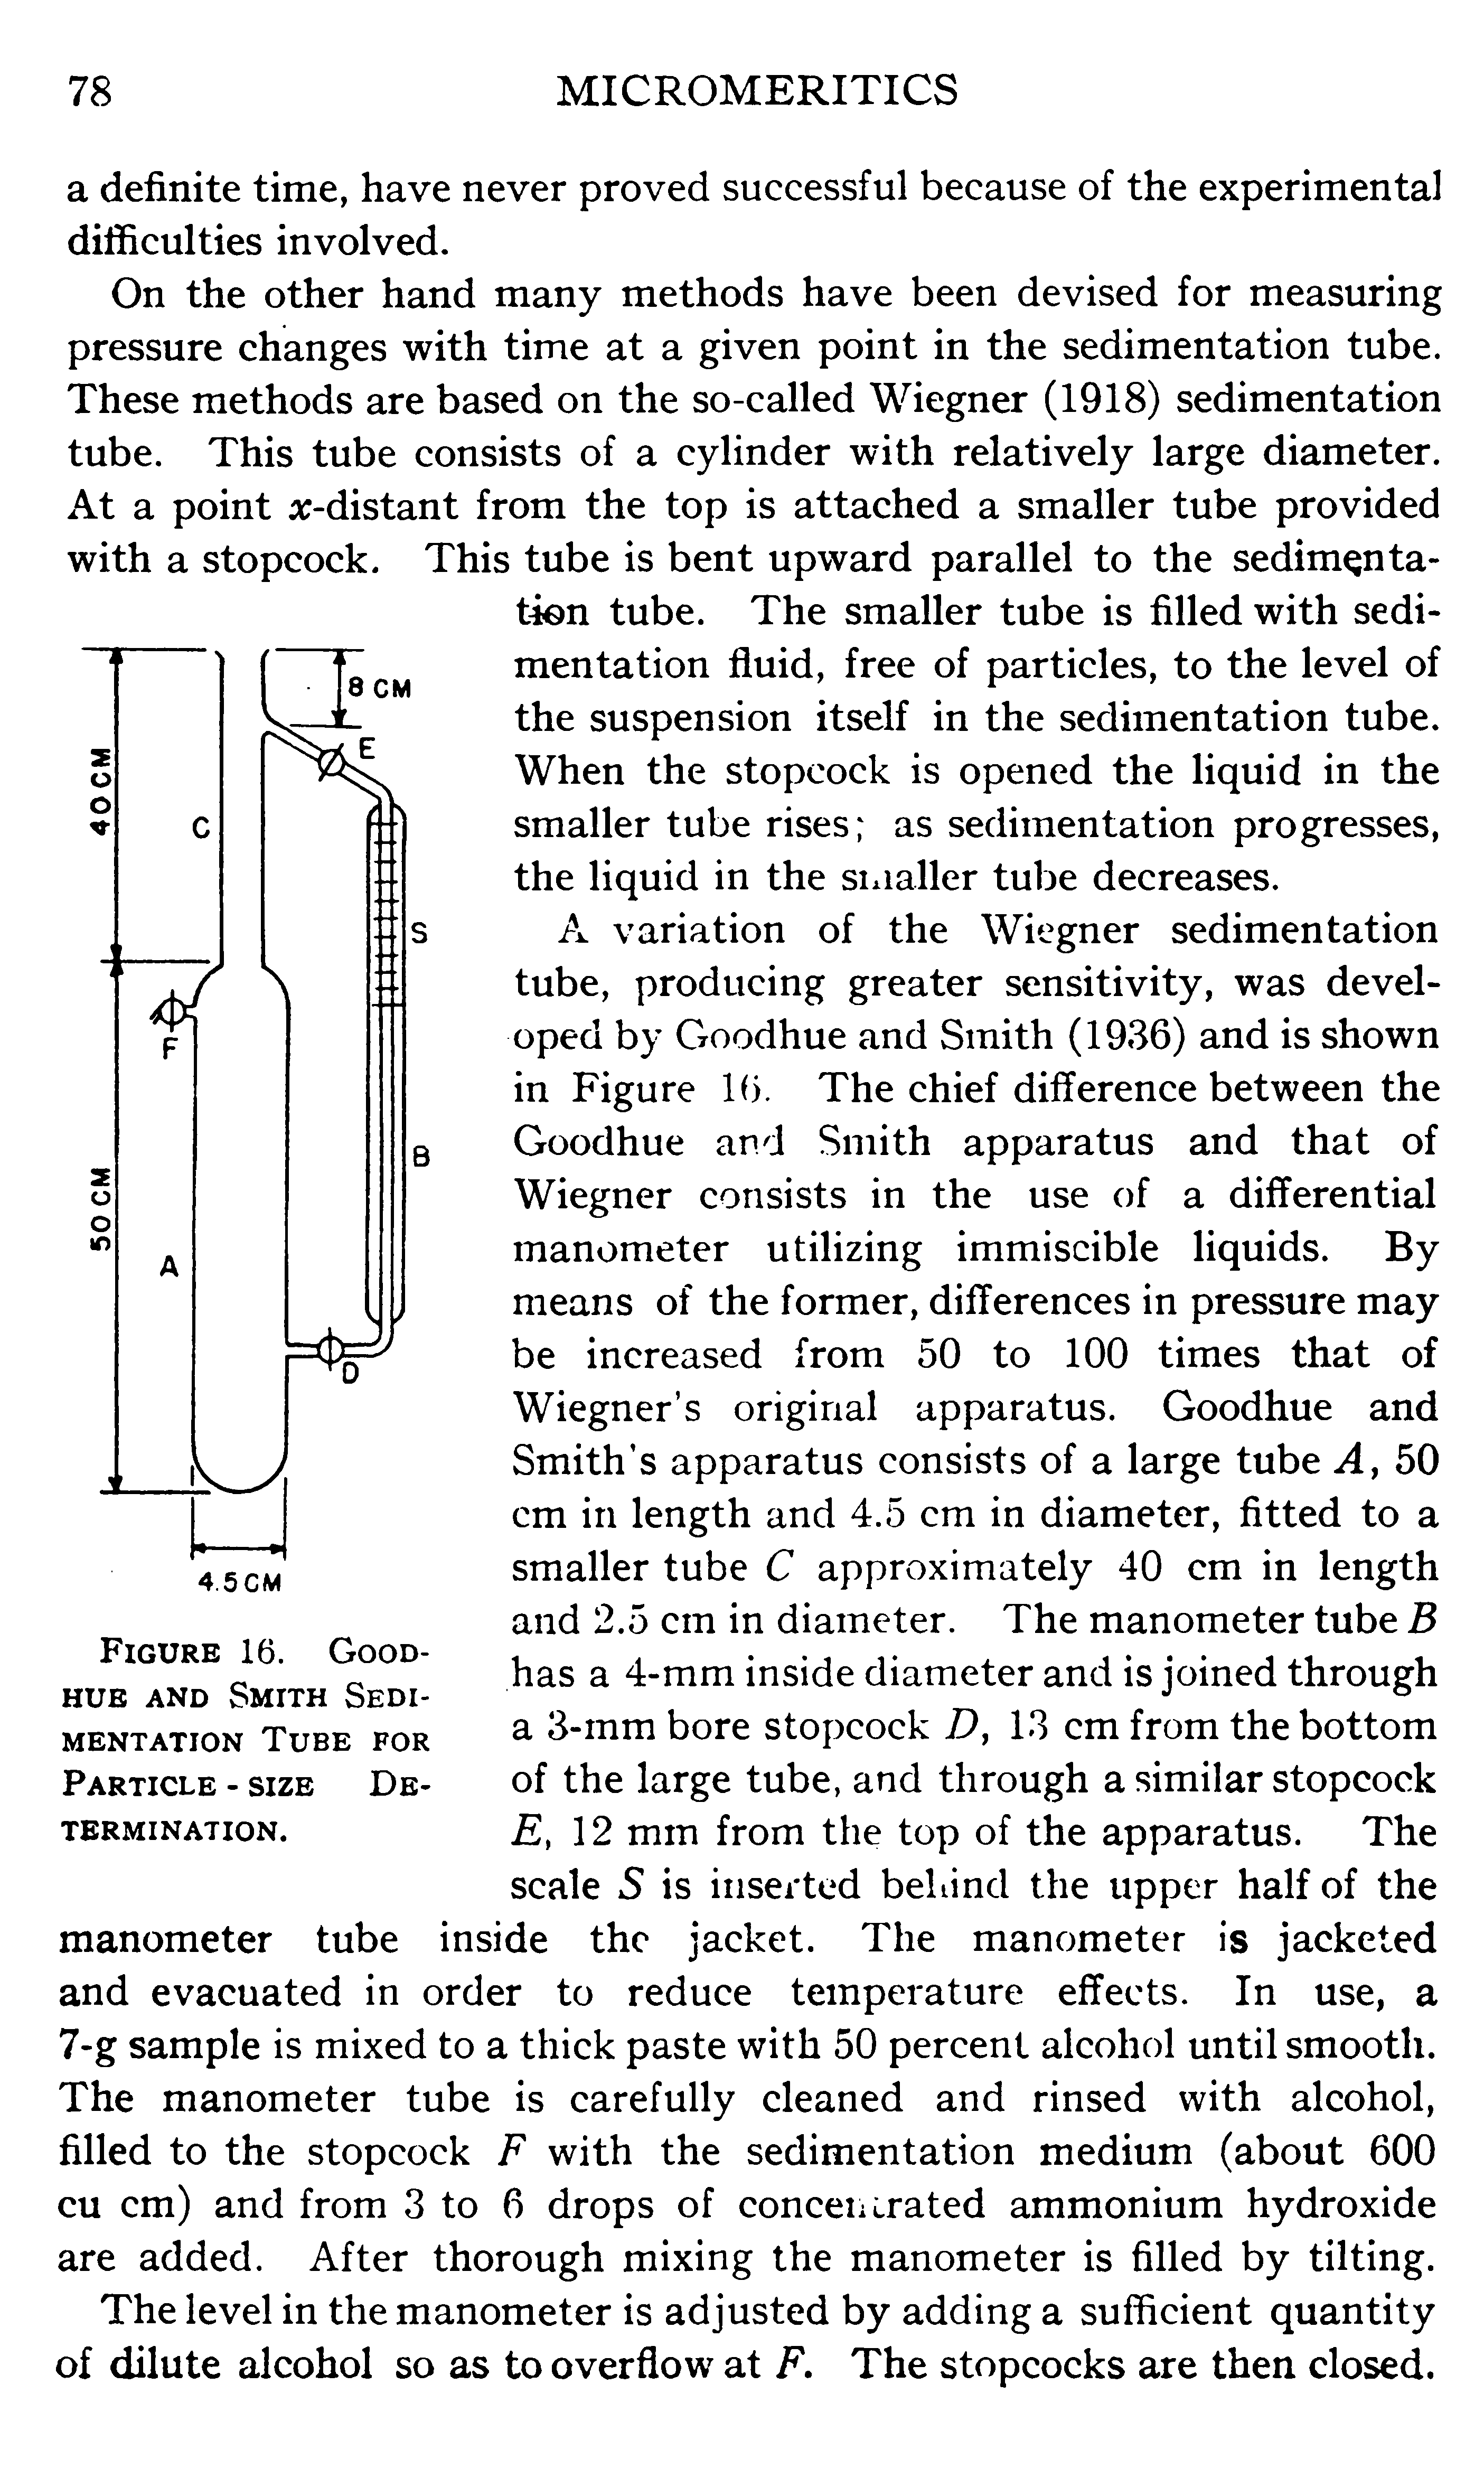 Figure 16. Good-hue and Smith Sedimentation Tube for Particle - size Determination.